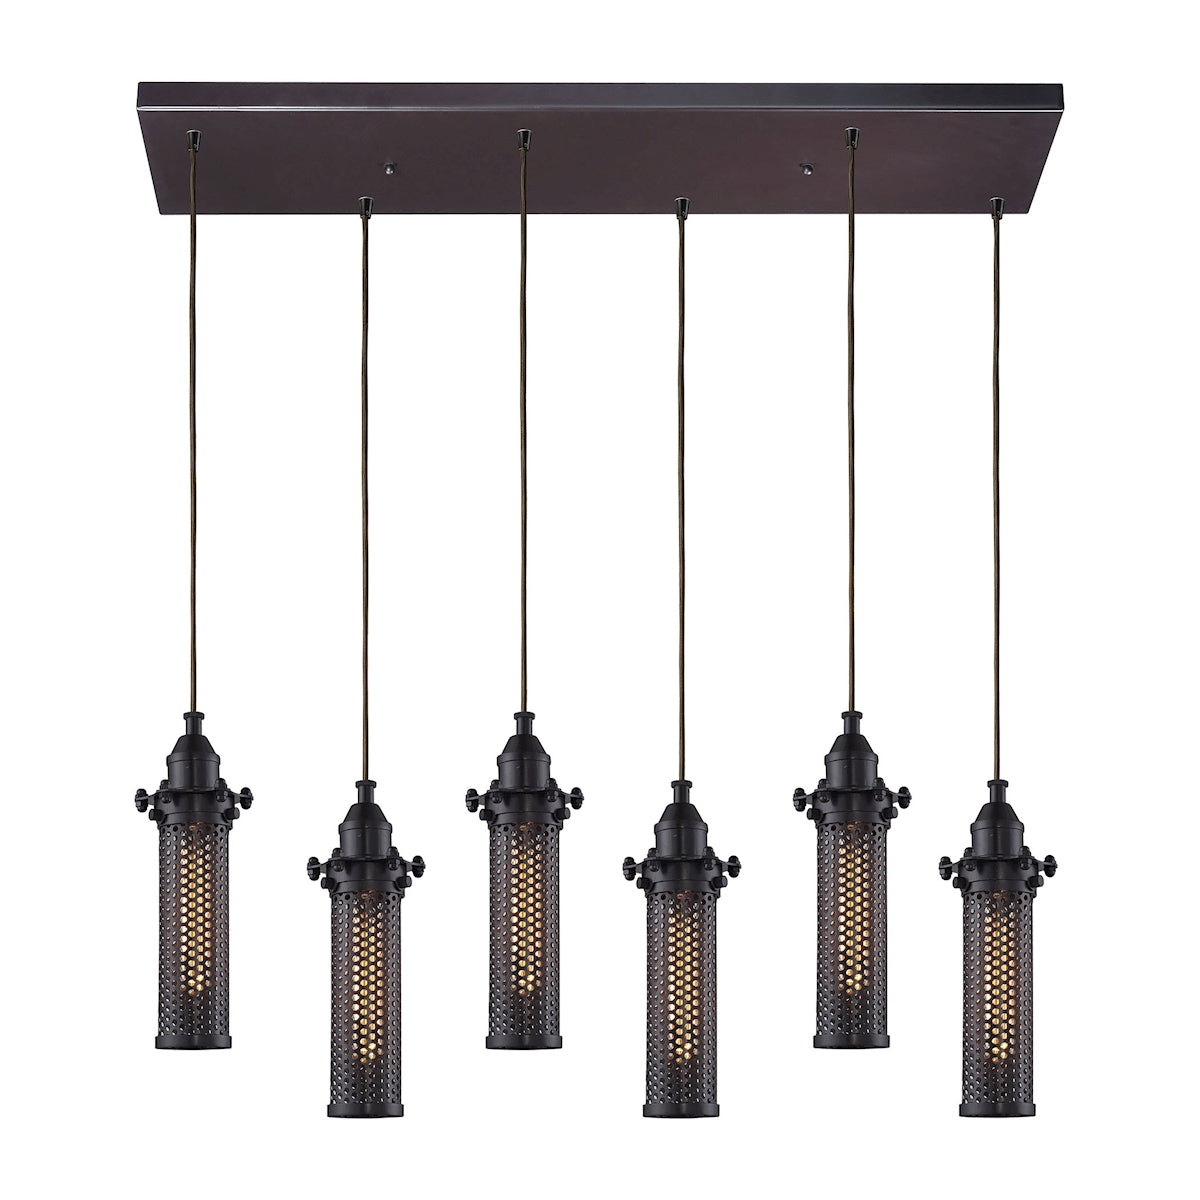 ELK Lighting 66325/6RC Fulton 6-Light Rectangular Pendant Fixture in Oil Rubbed Bronze with Perforated Metal Shade